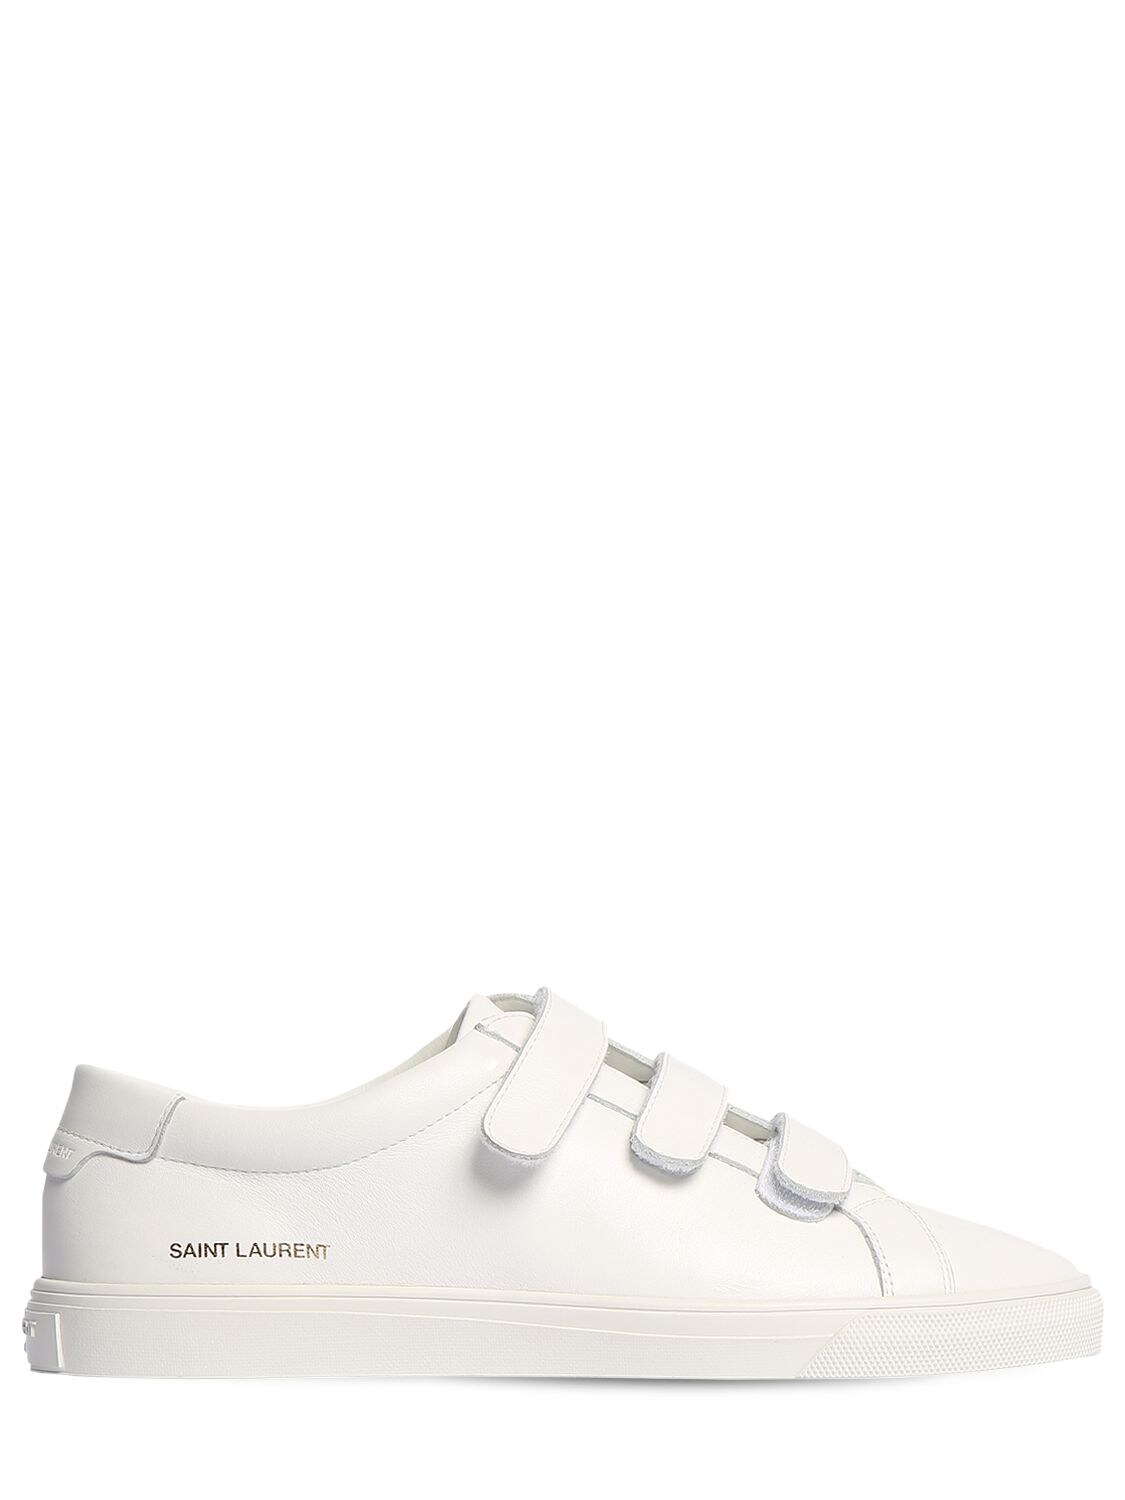 SAINT LAURENT 20MM ANDY LEATHER STRAPPY SNEAKERS,71IG5D025-OTAZMA2